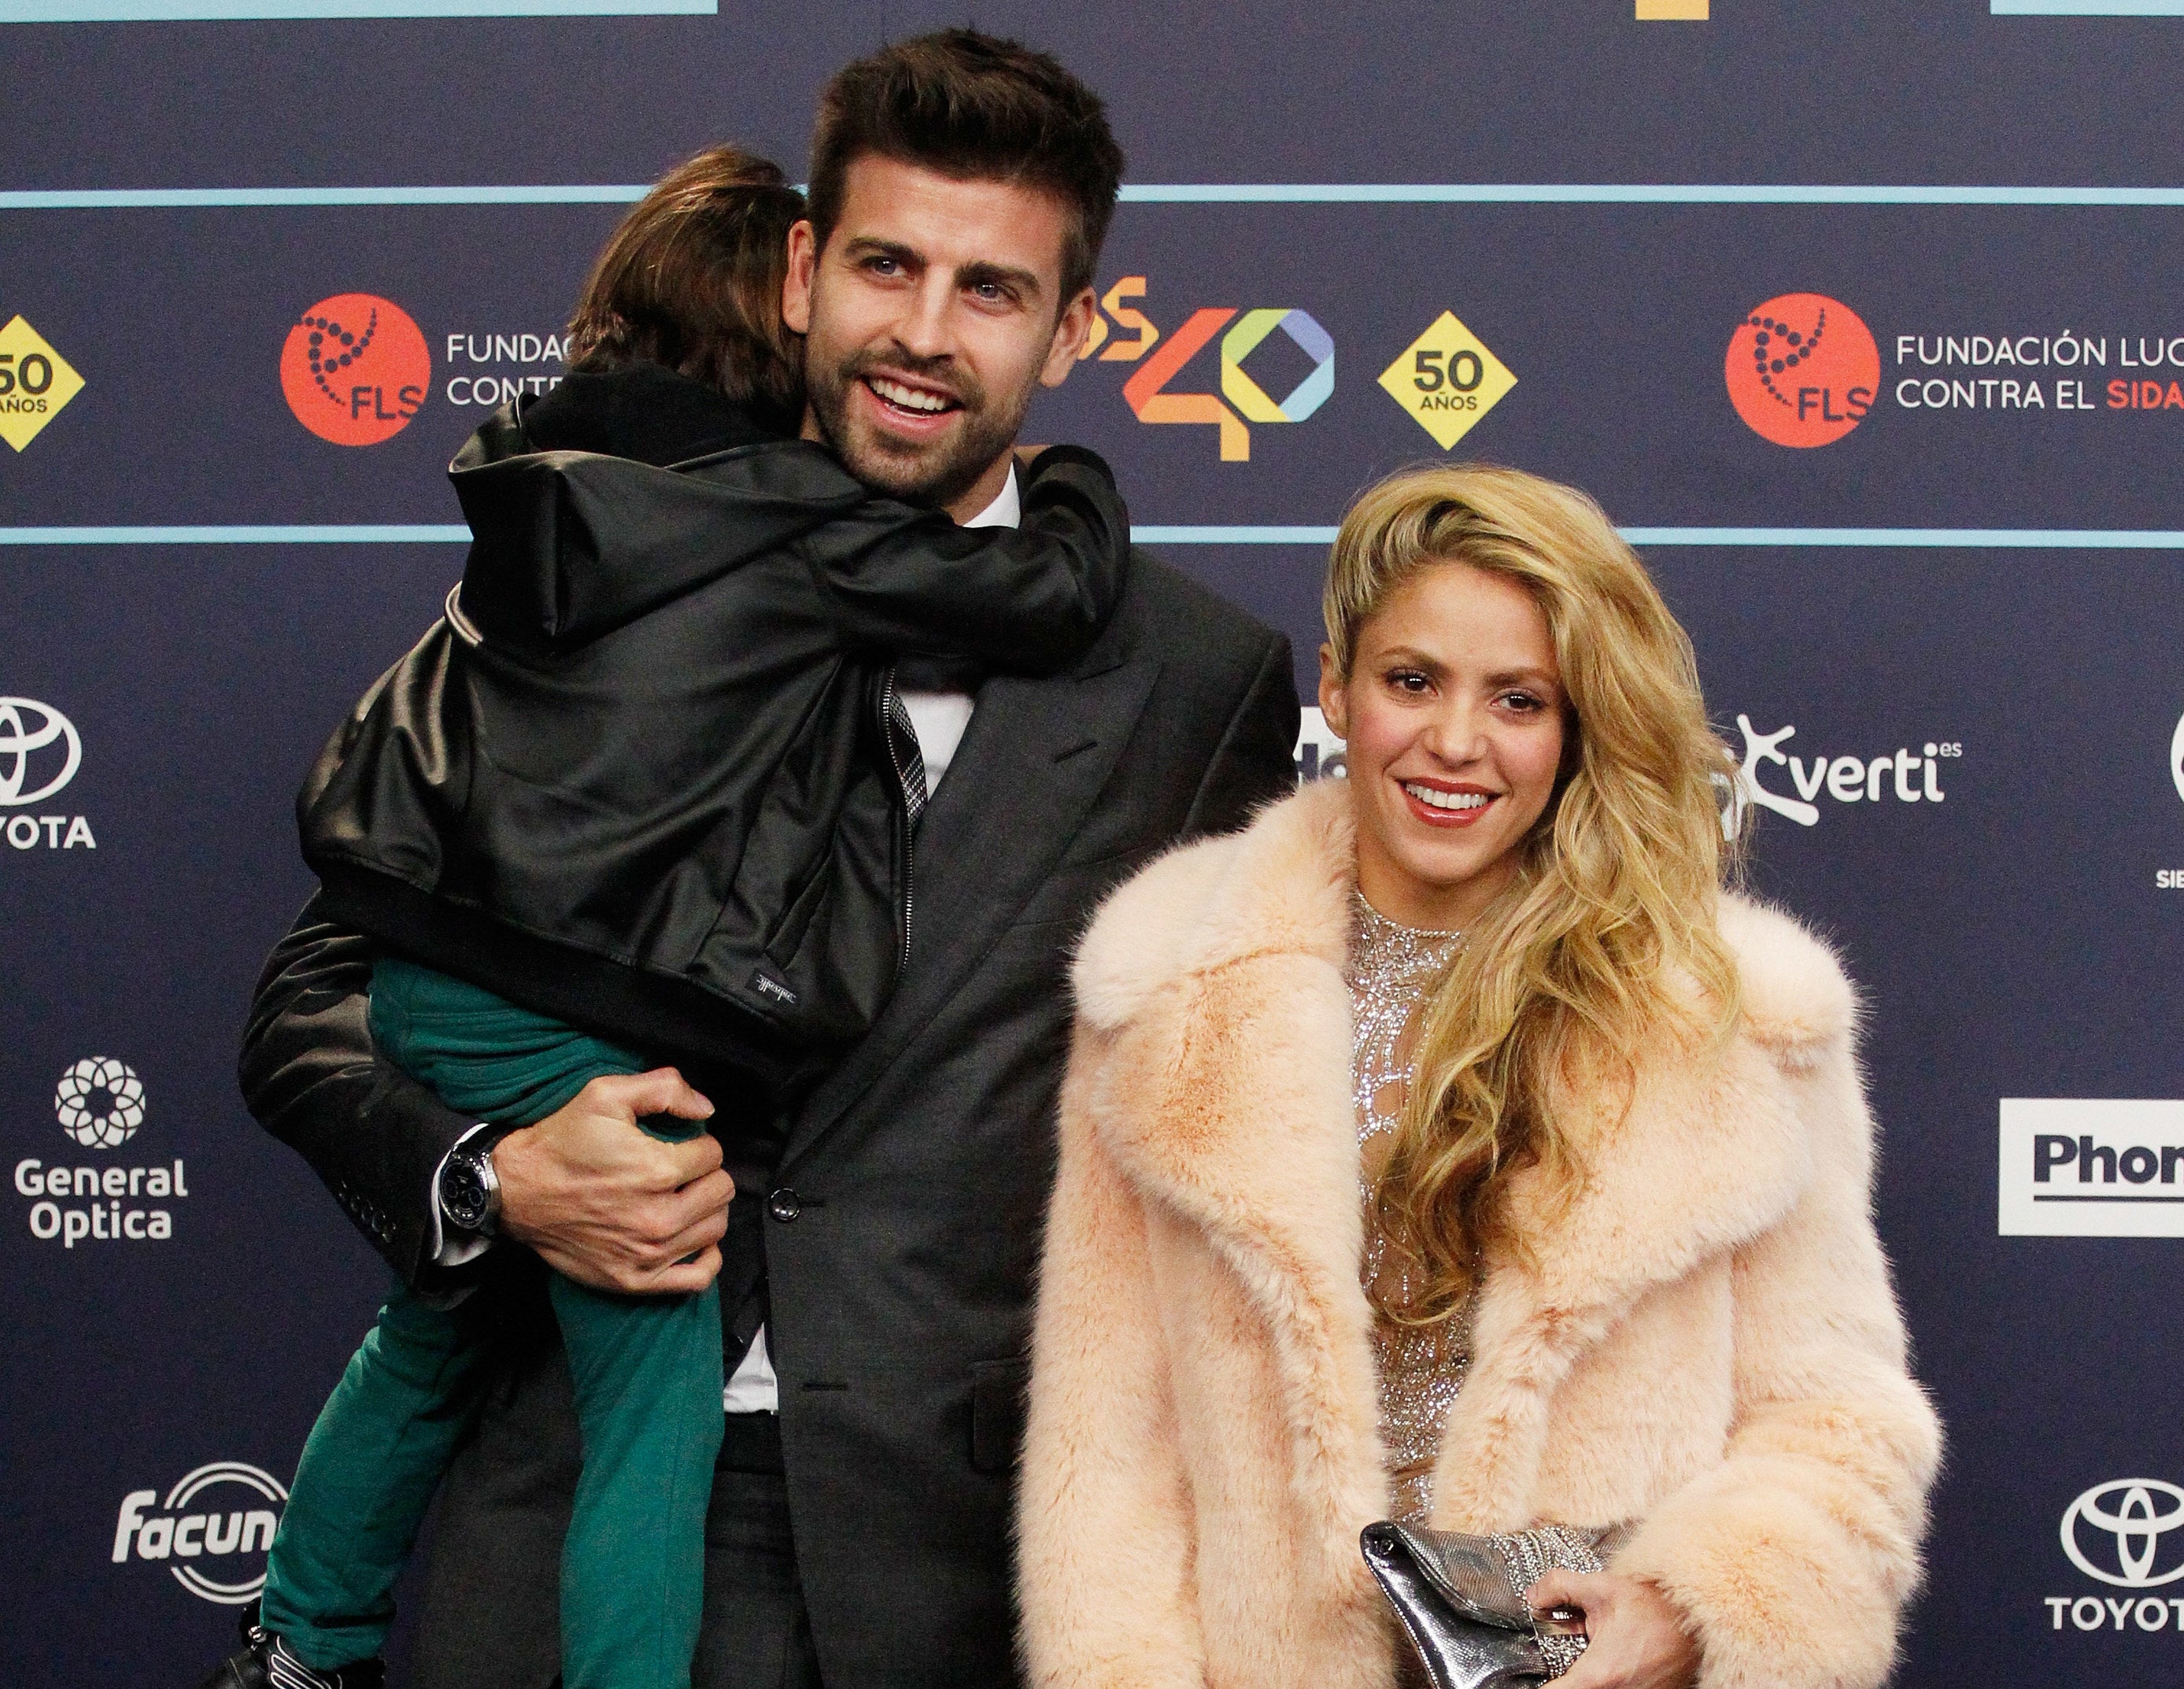 Shakira and Gerard attend an event with Milan